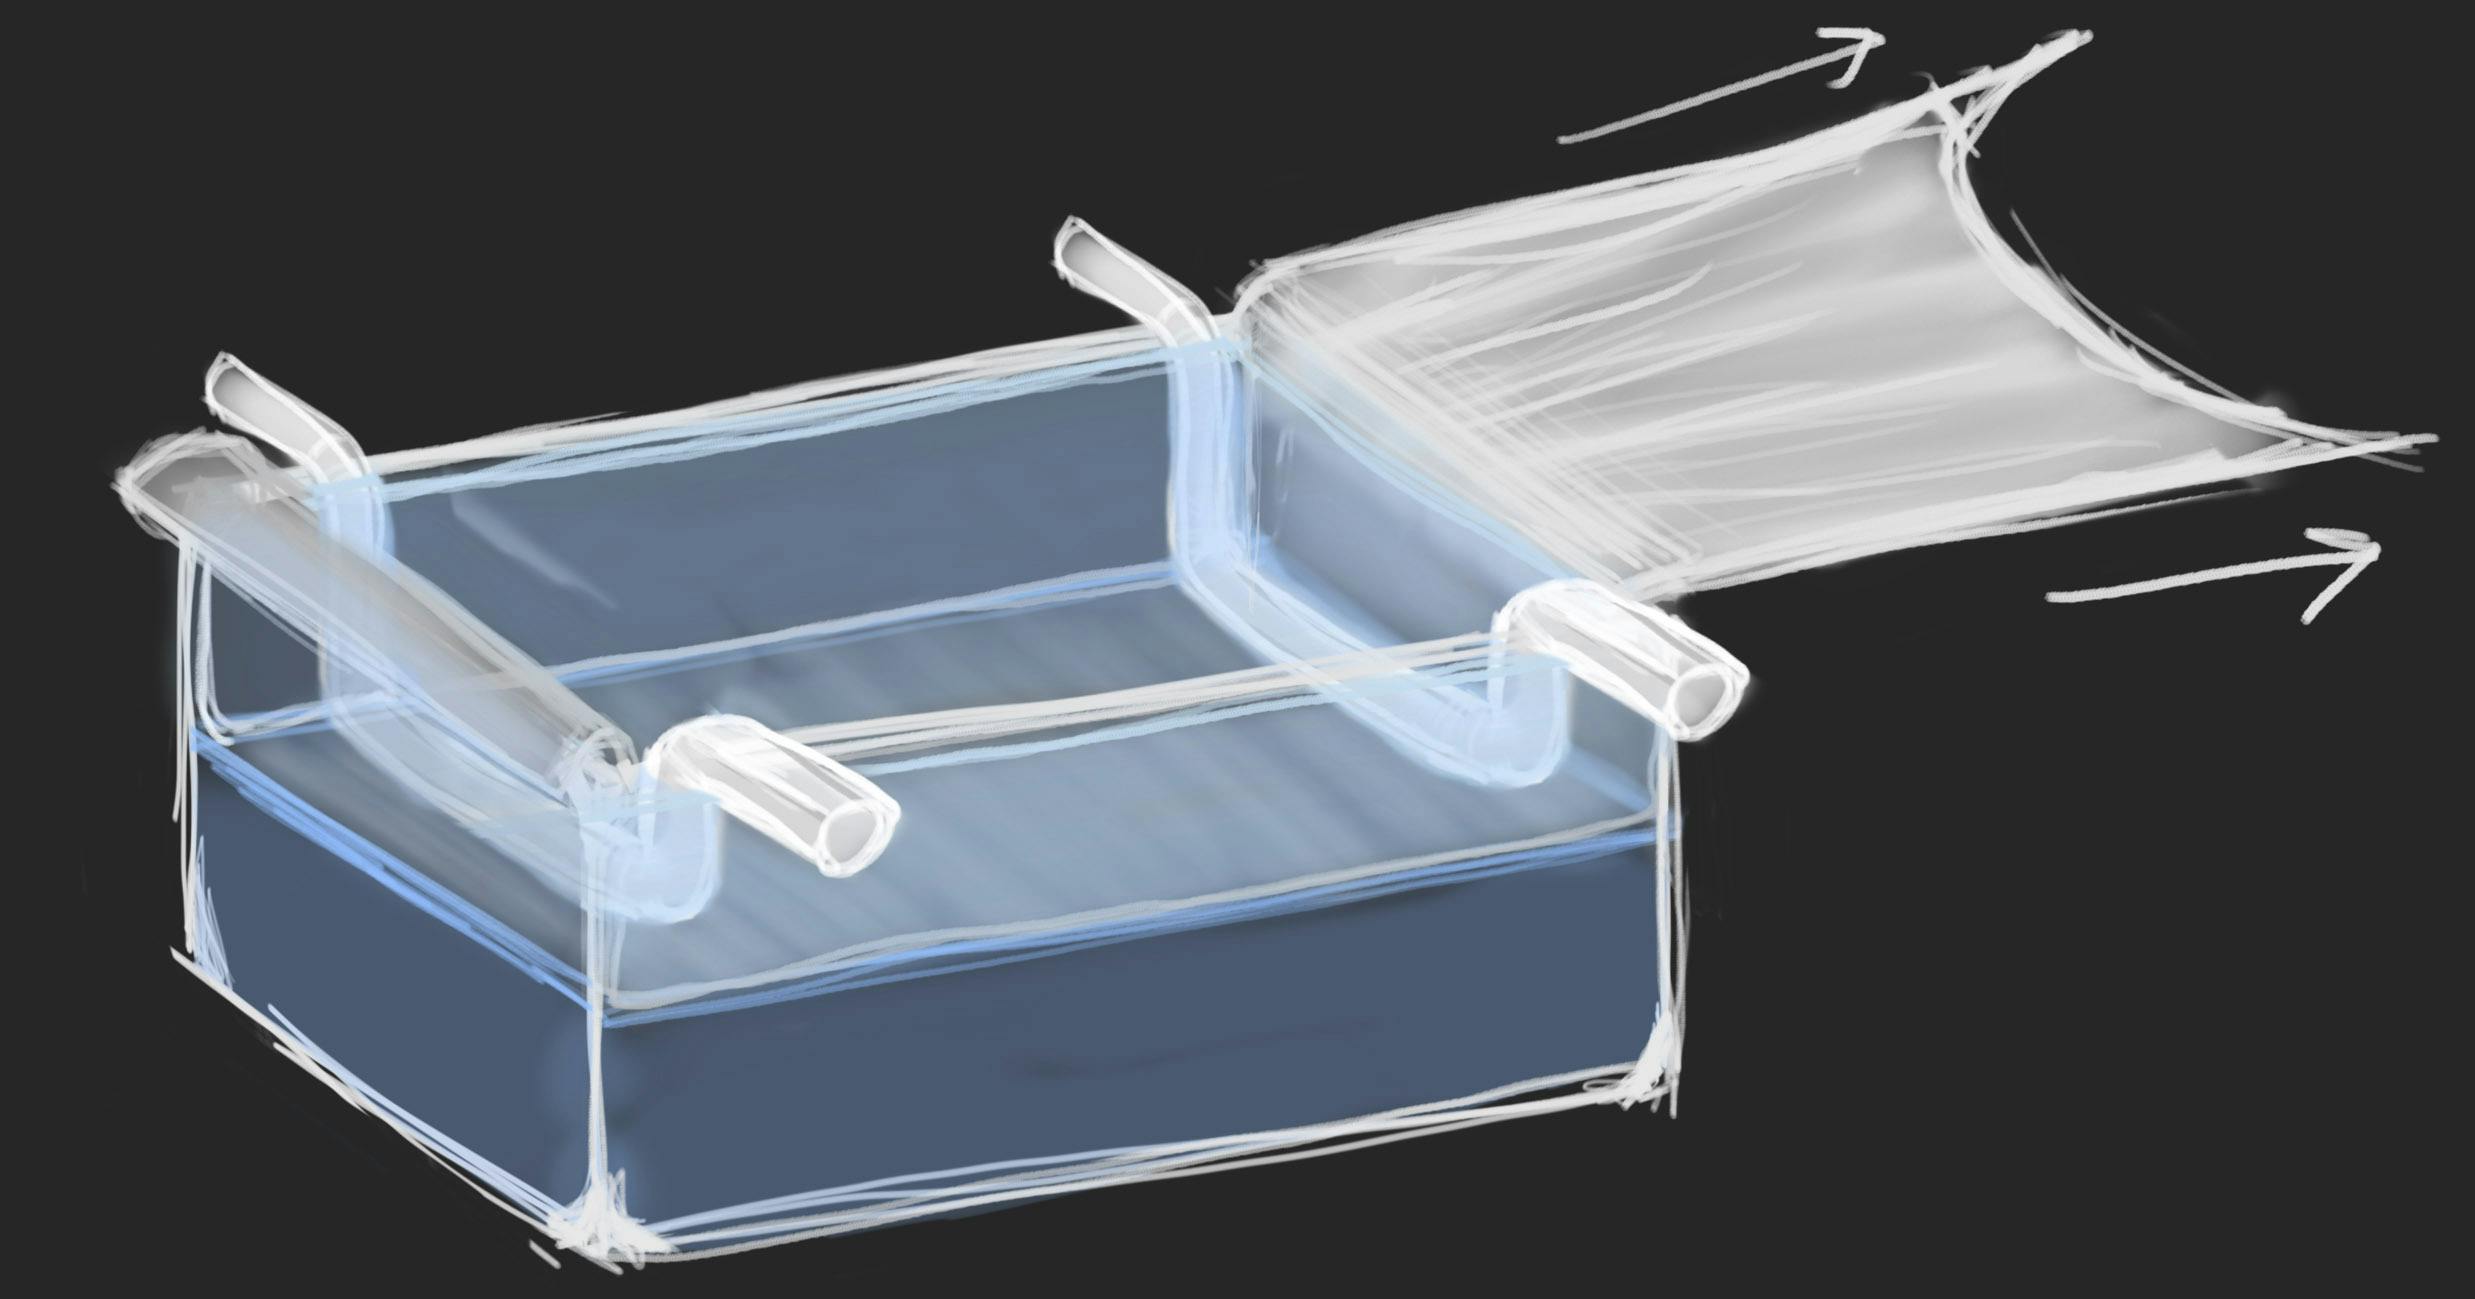 a drawing of an aquarium filled half way with water and a sheet of plastic draped over the top and two curved pieces of PVC holding down the plastic while it is being pulled from the side